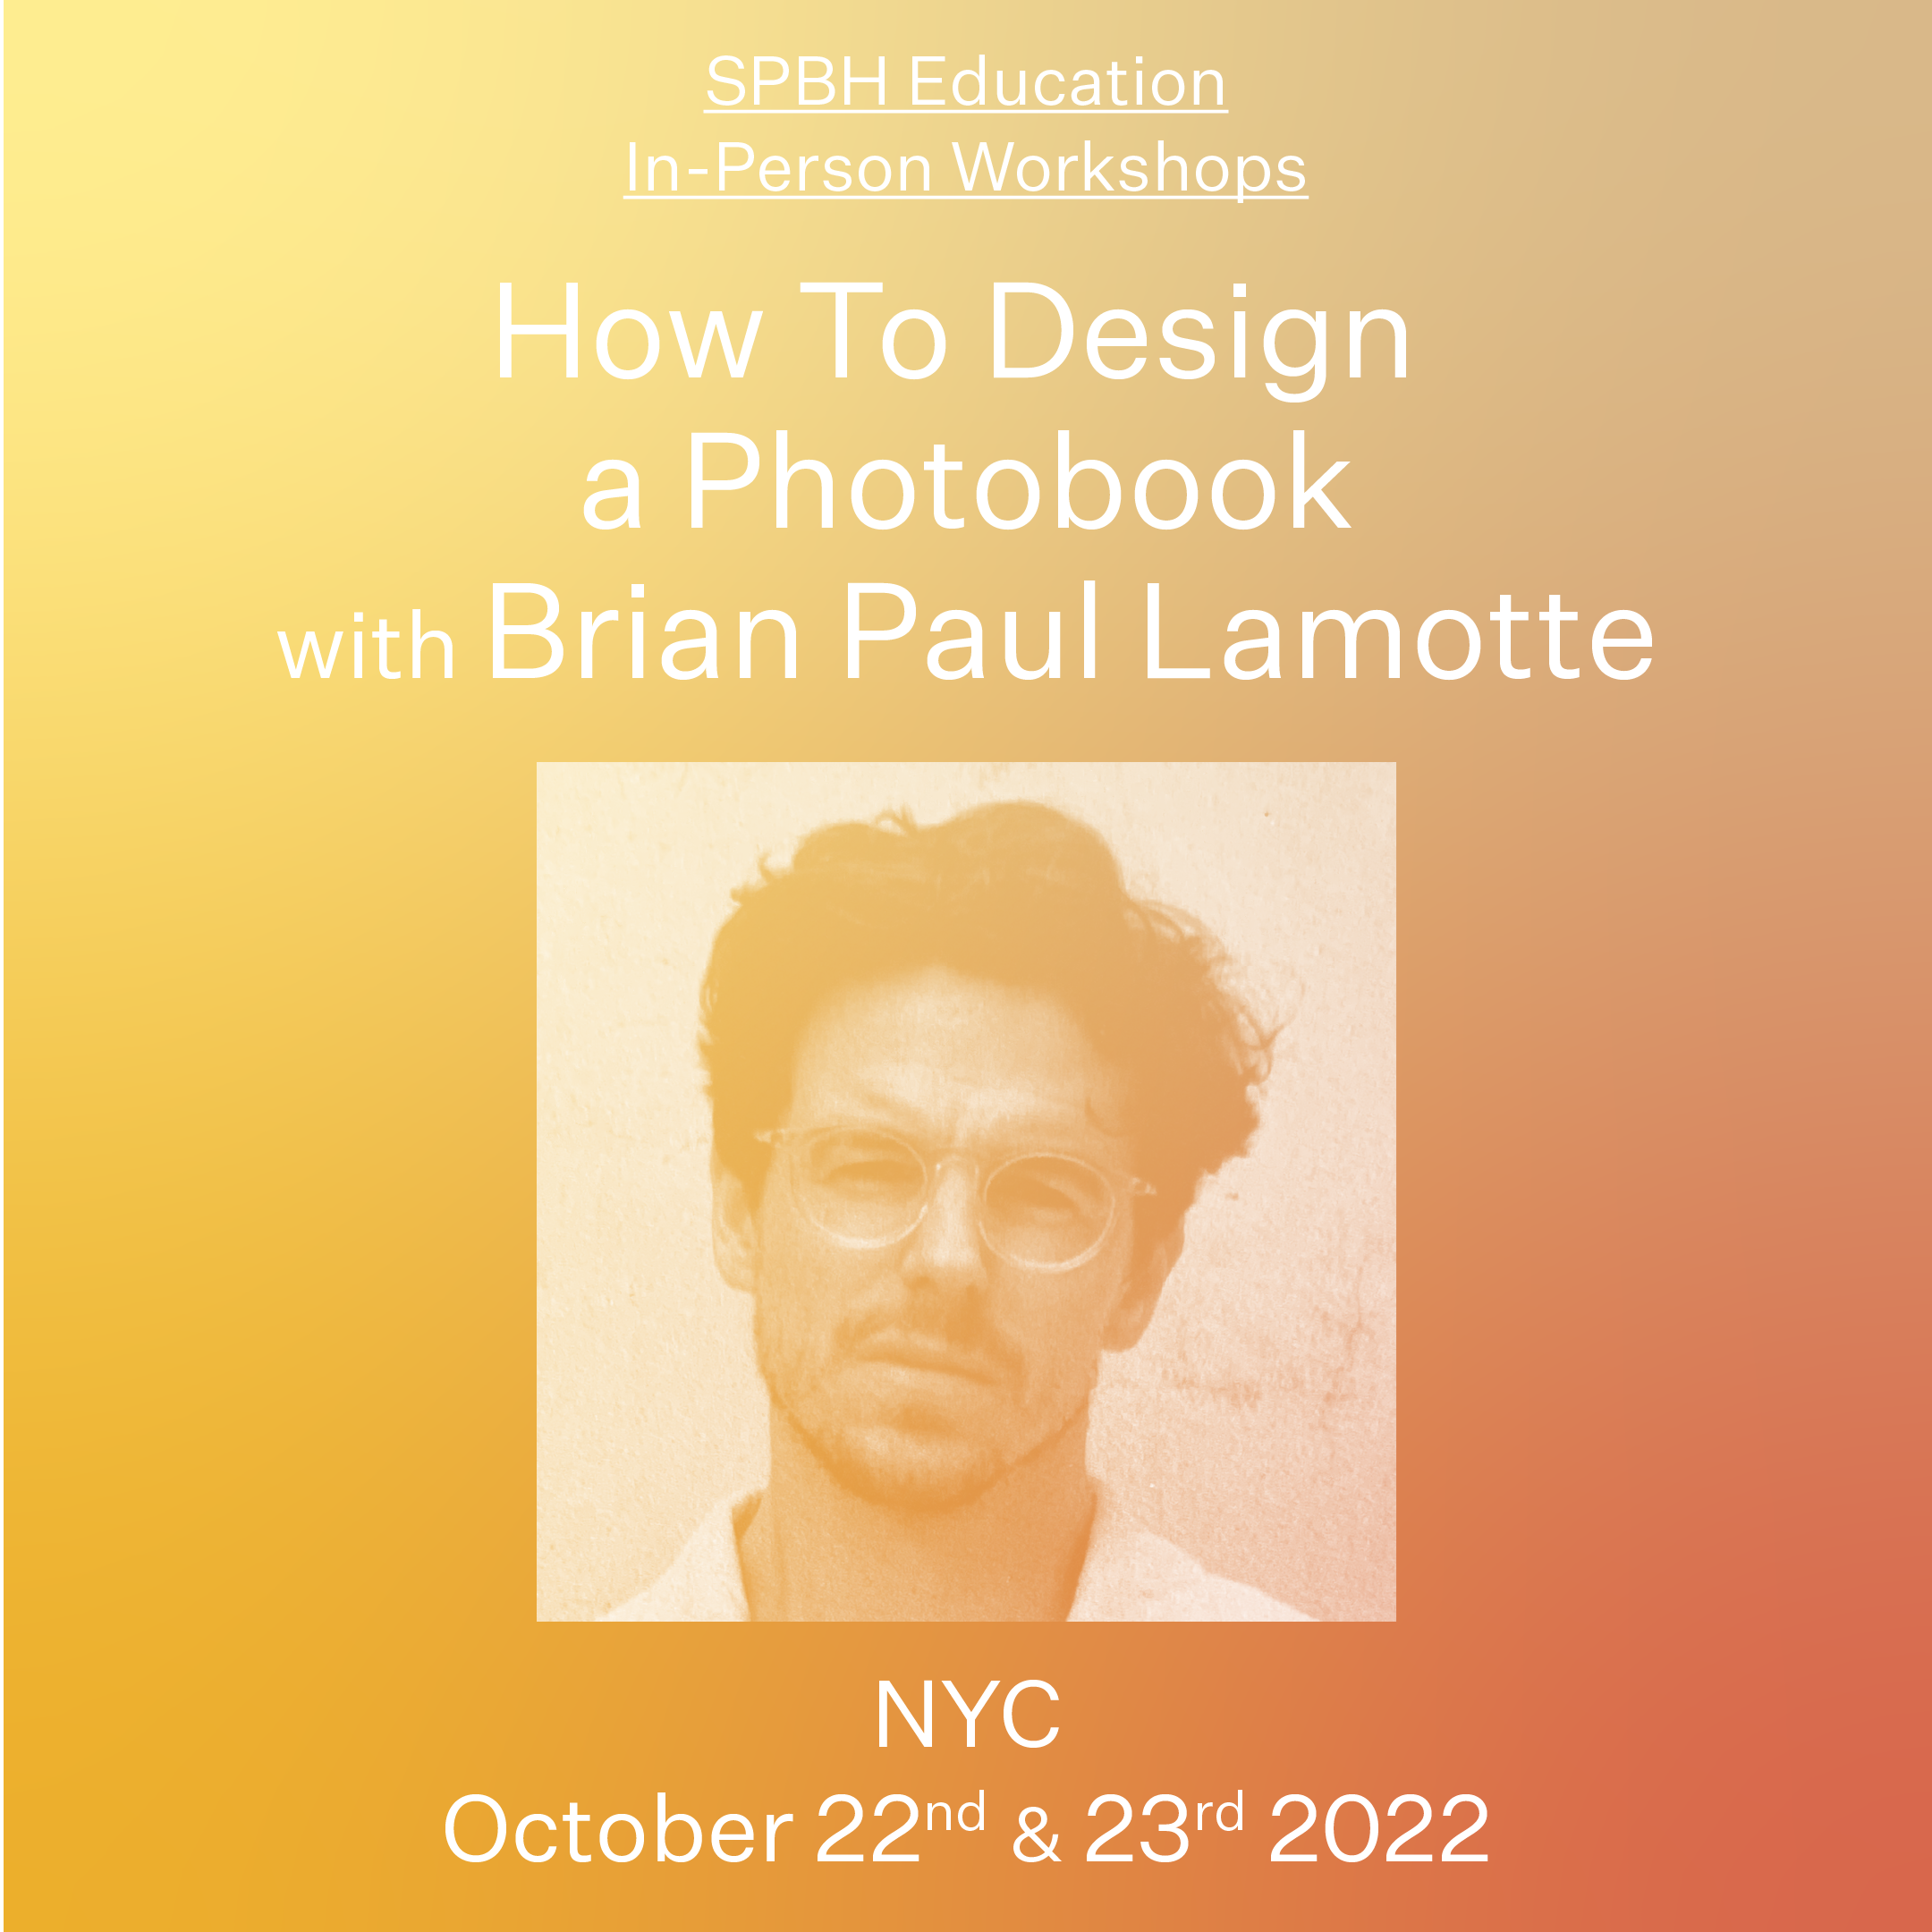 NYC WORKSHOP: How To Design a Photobook with Brian Paul Lamotte